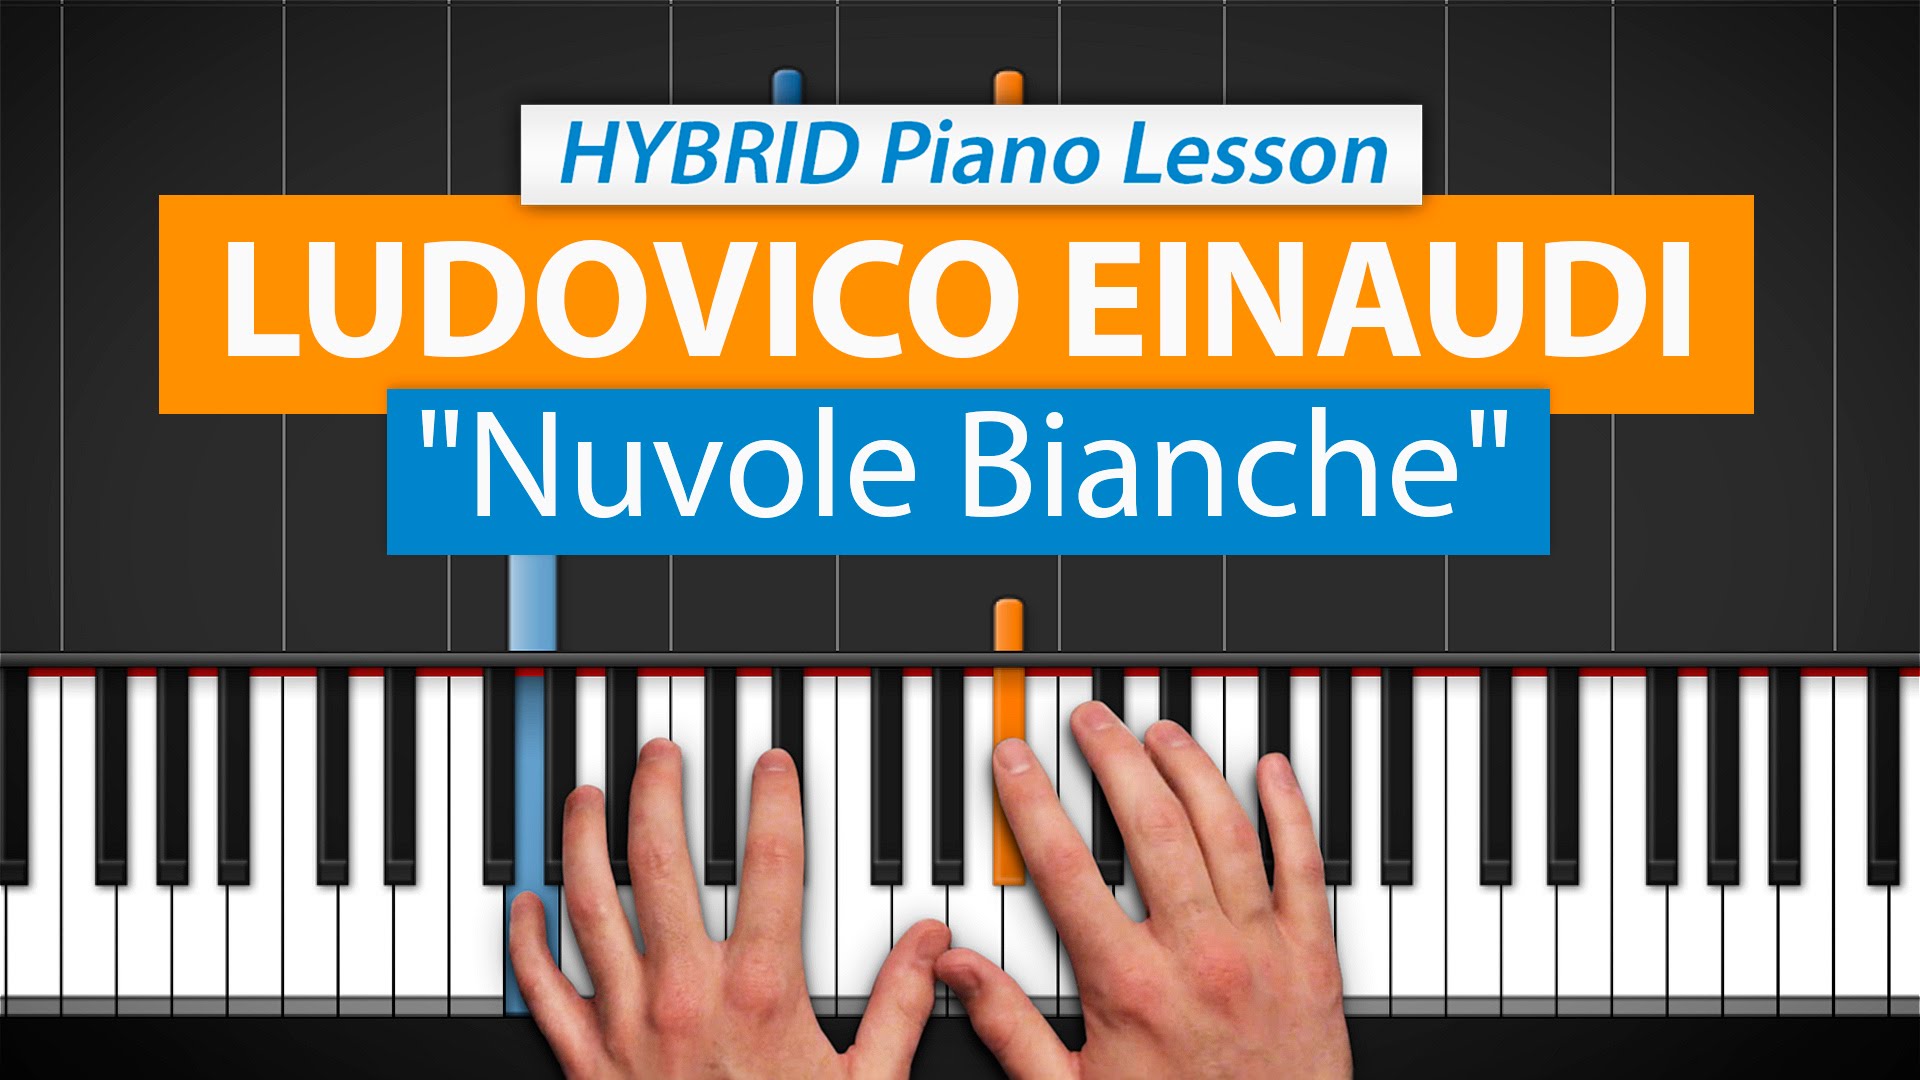 Nuvole Bianche Hdpiano Learn how to play nuvole bianche by ludovico einaudi with letter notes sheet / chords for piano and keyboard. nuvole bianche hdpiano